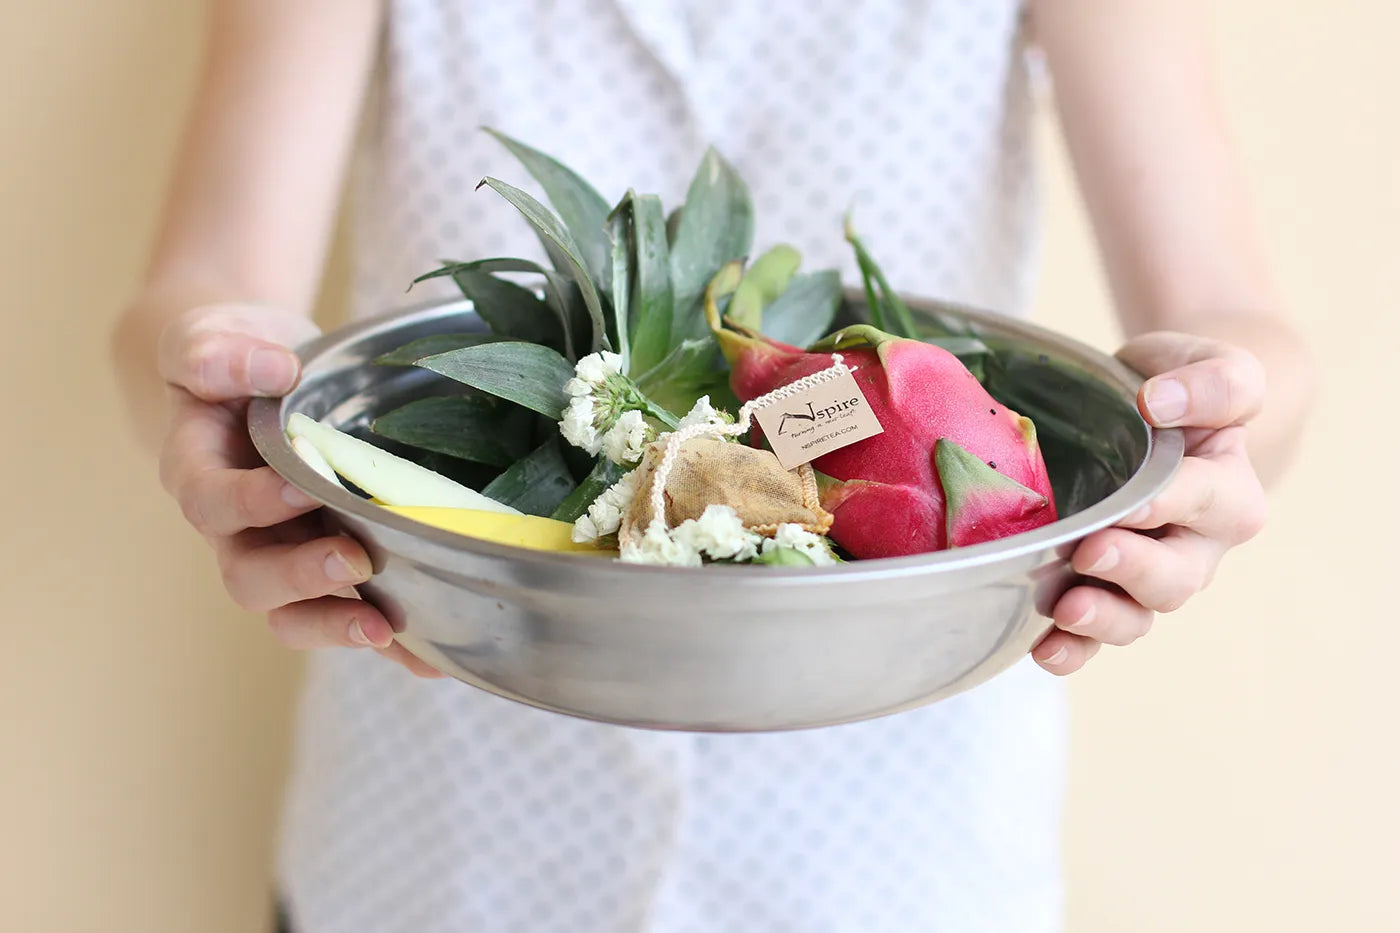 6 Ways to Reduce Your Food Waste